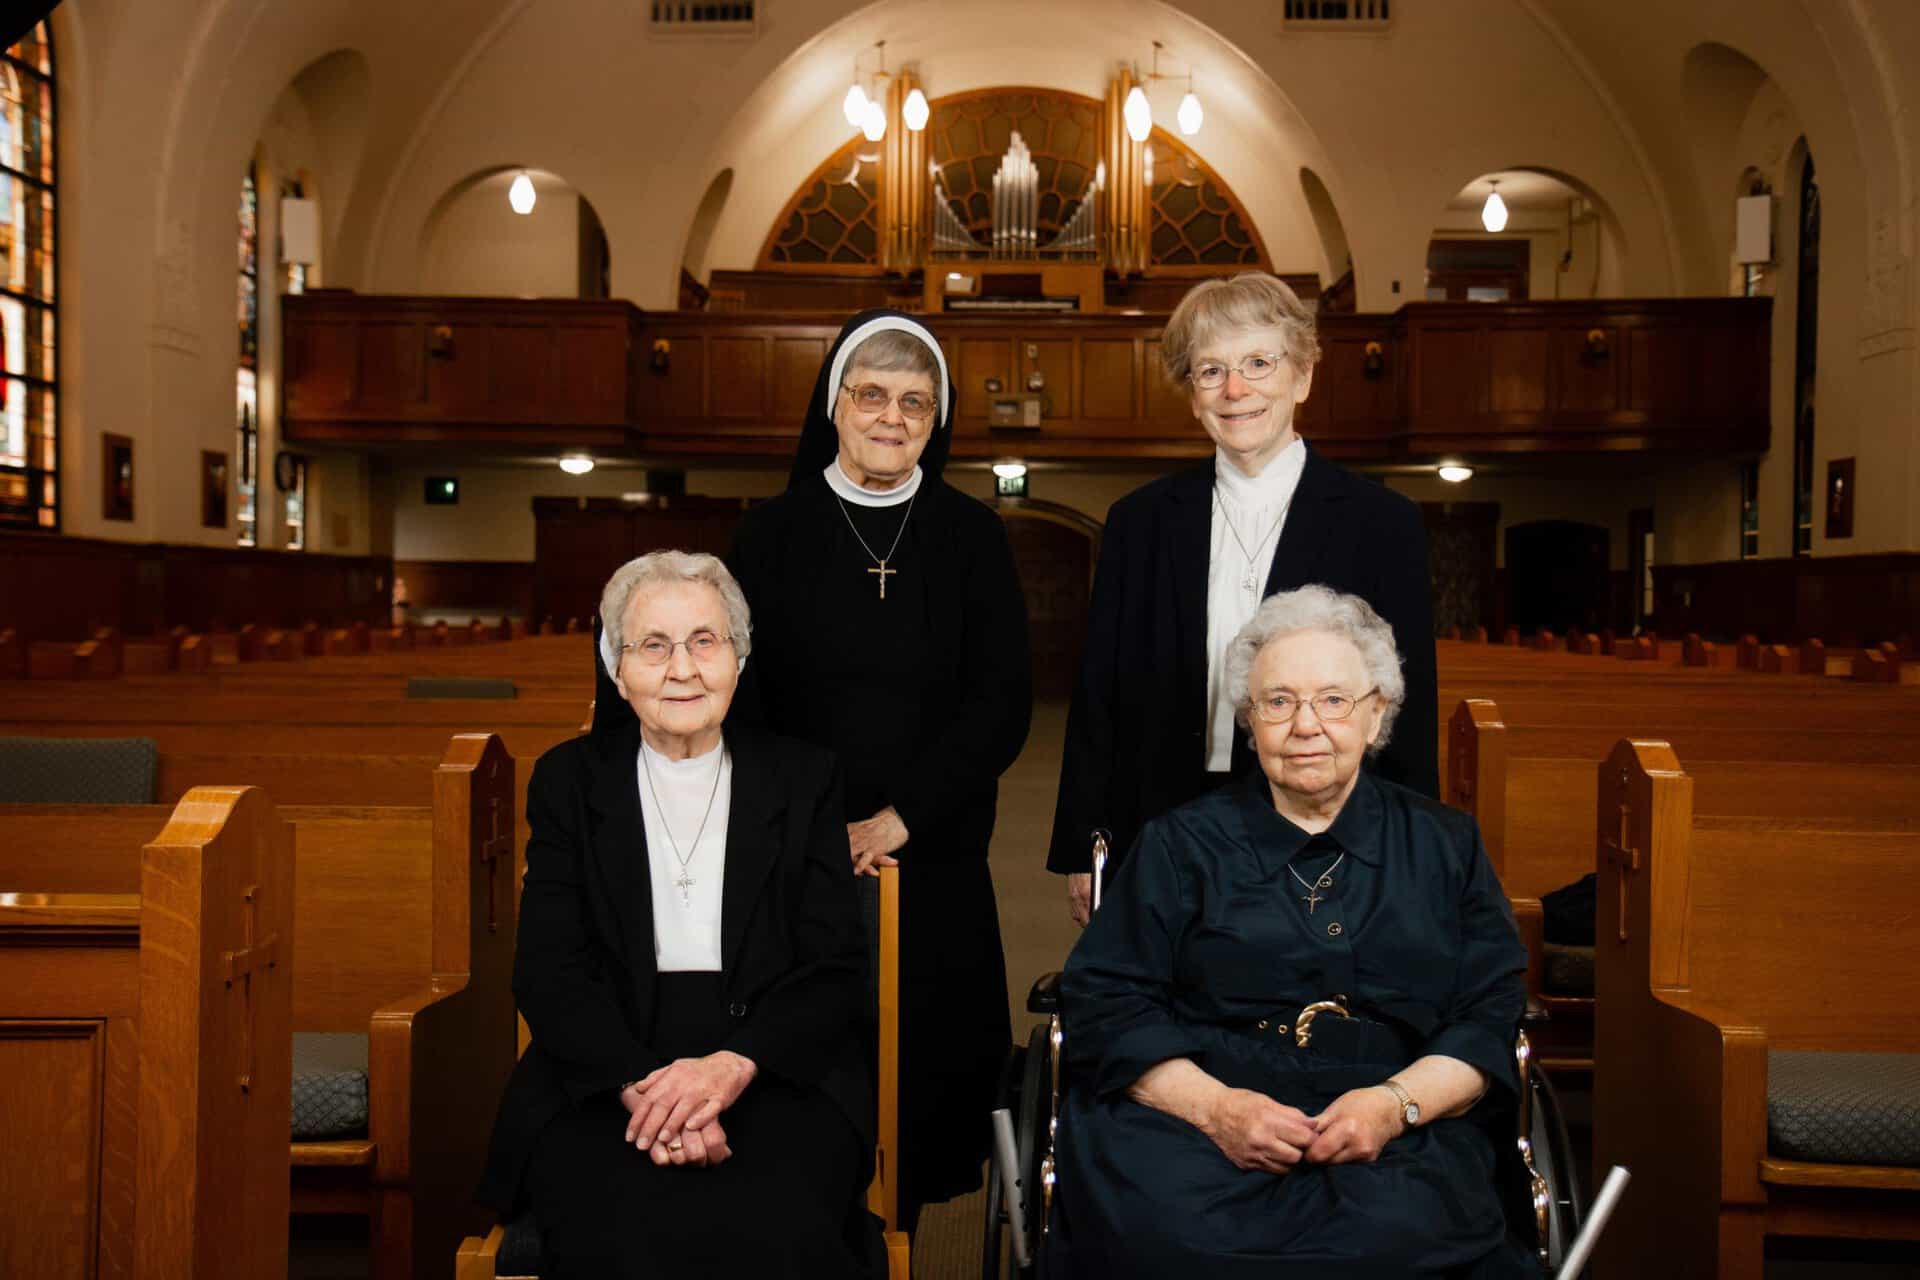 Four Sisters honored at 2020 Jubilee